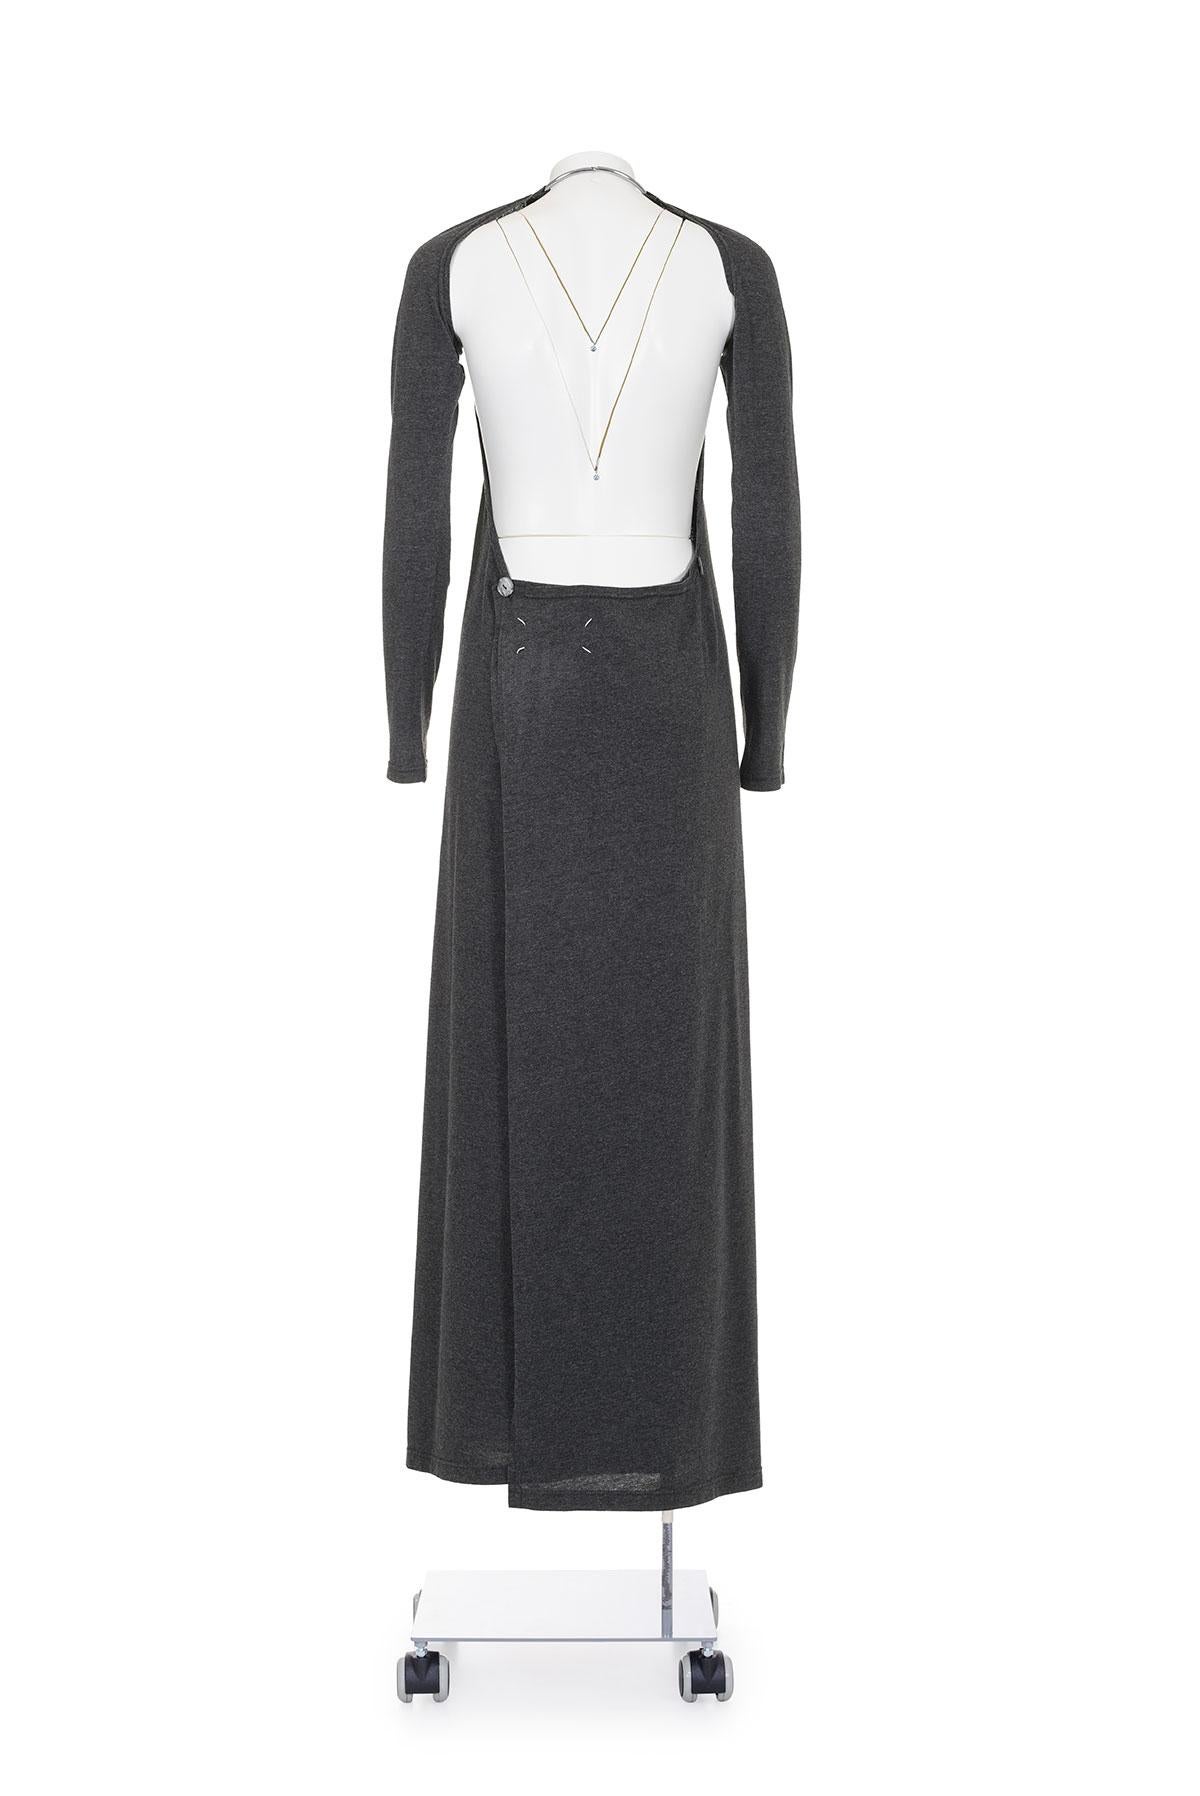 MAISON MARTIN MARGIELA SS 99 Jersey Dress with Choker  In Good Condition For Sale In Milano, MILANO